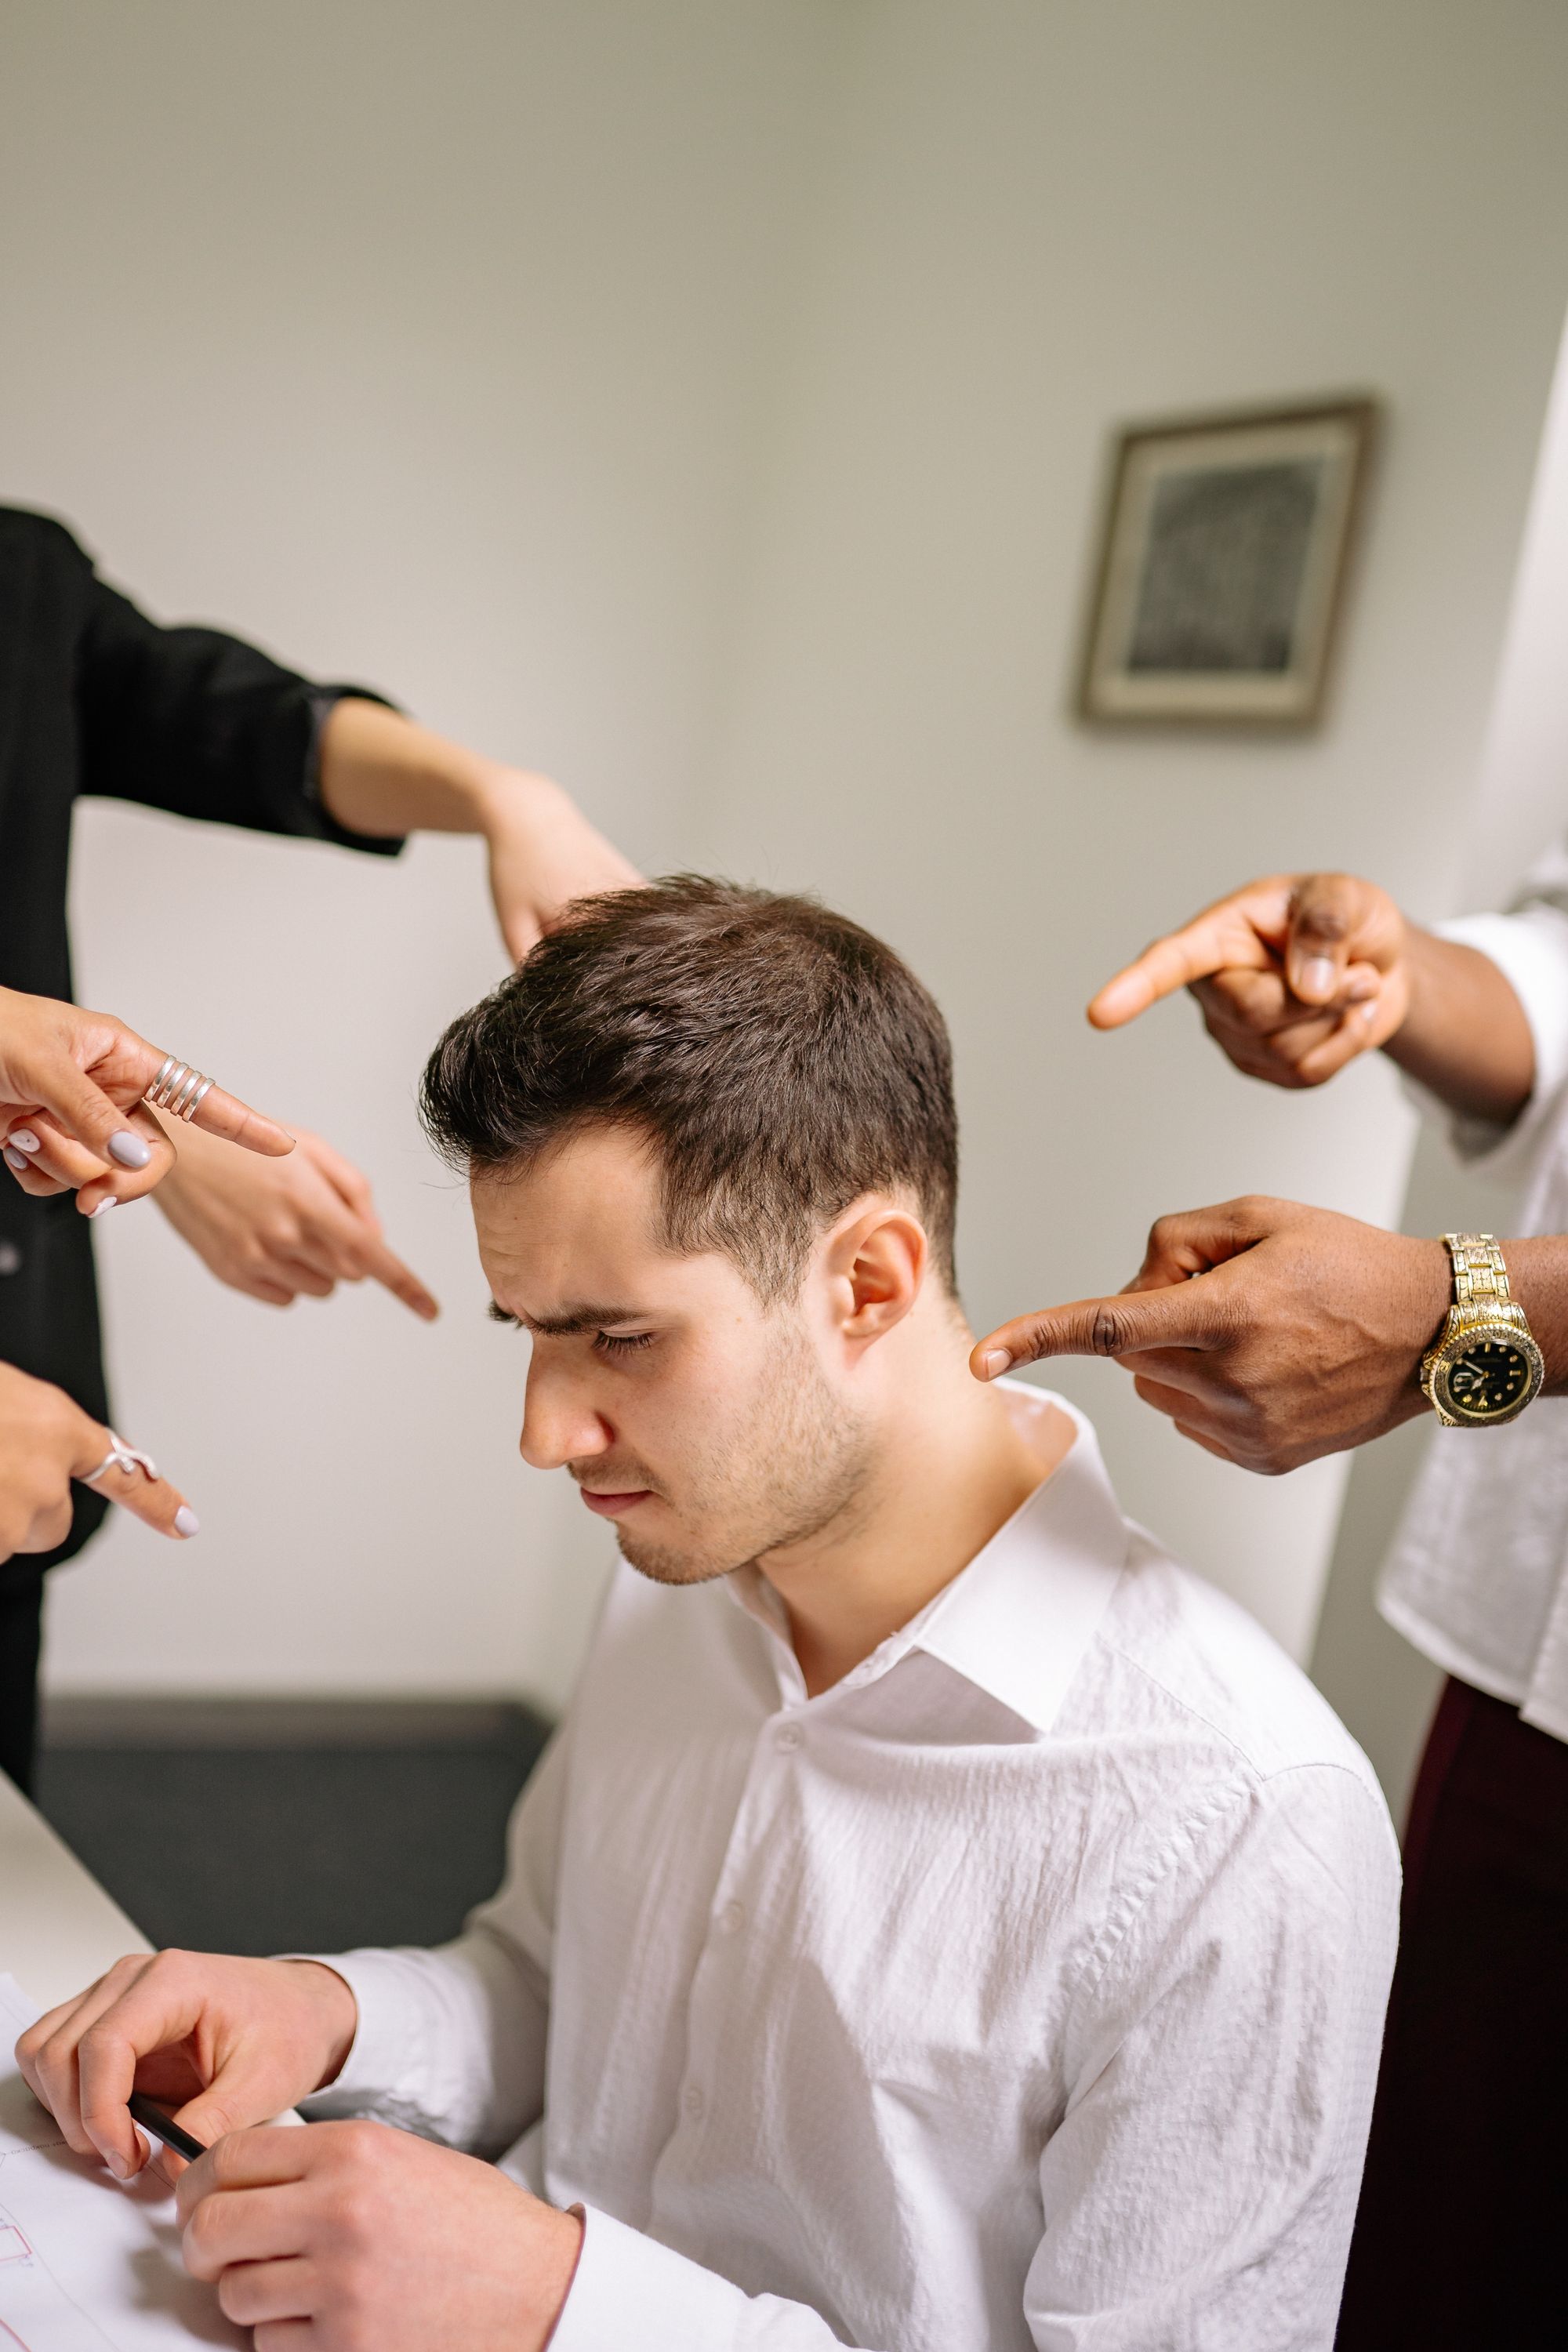 What are the things involved in workplace bullying